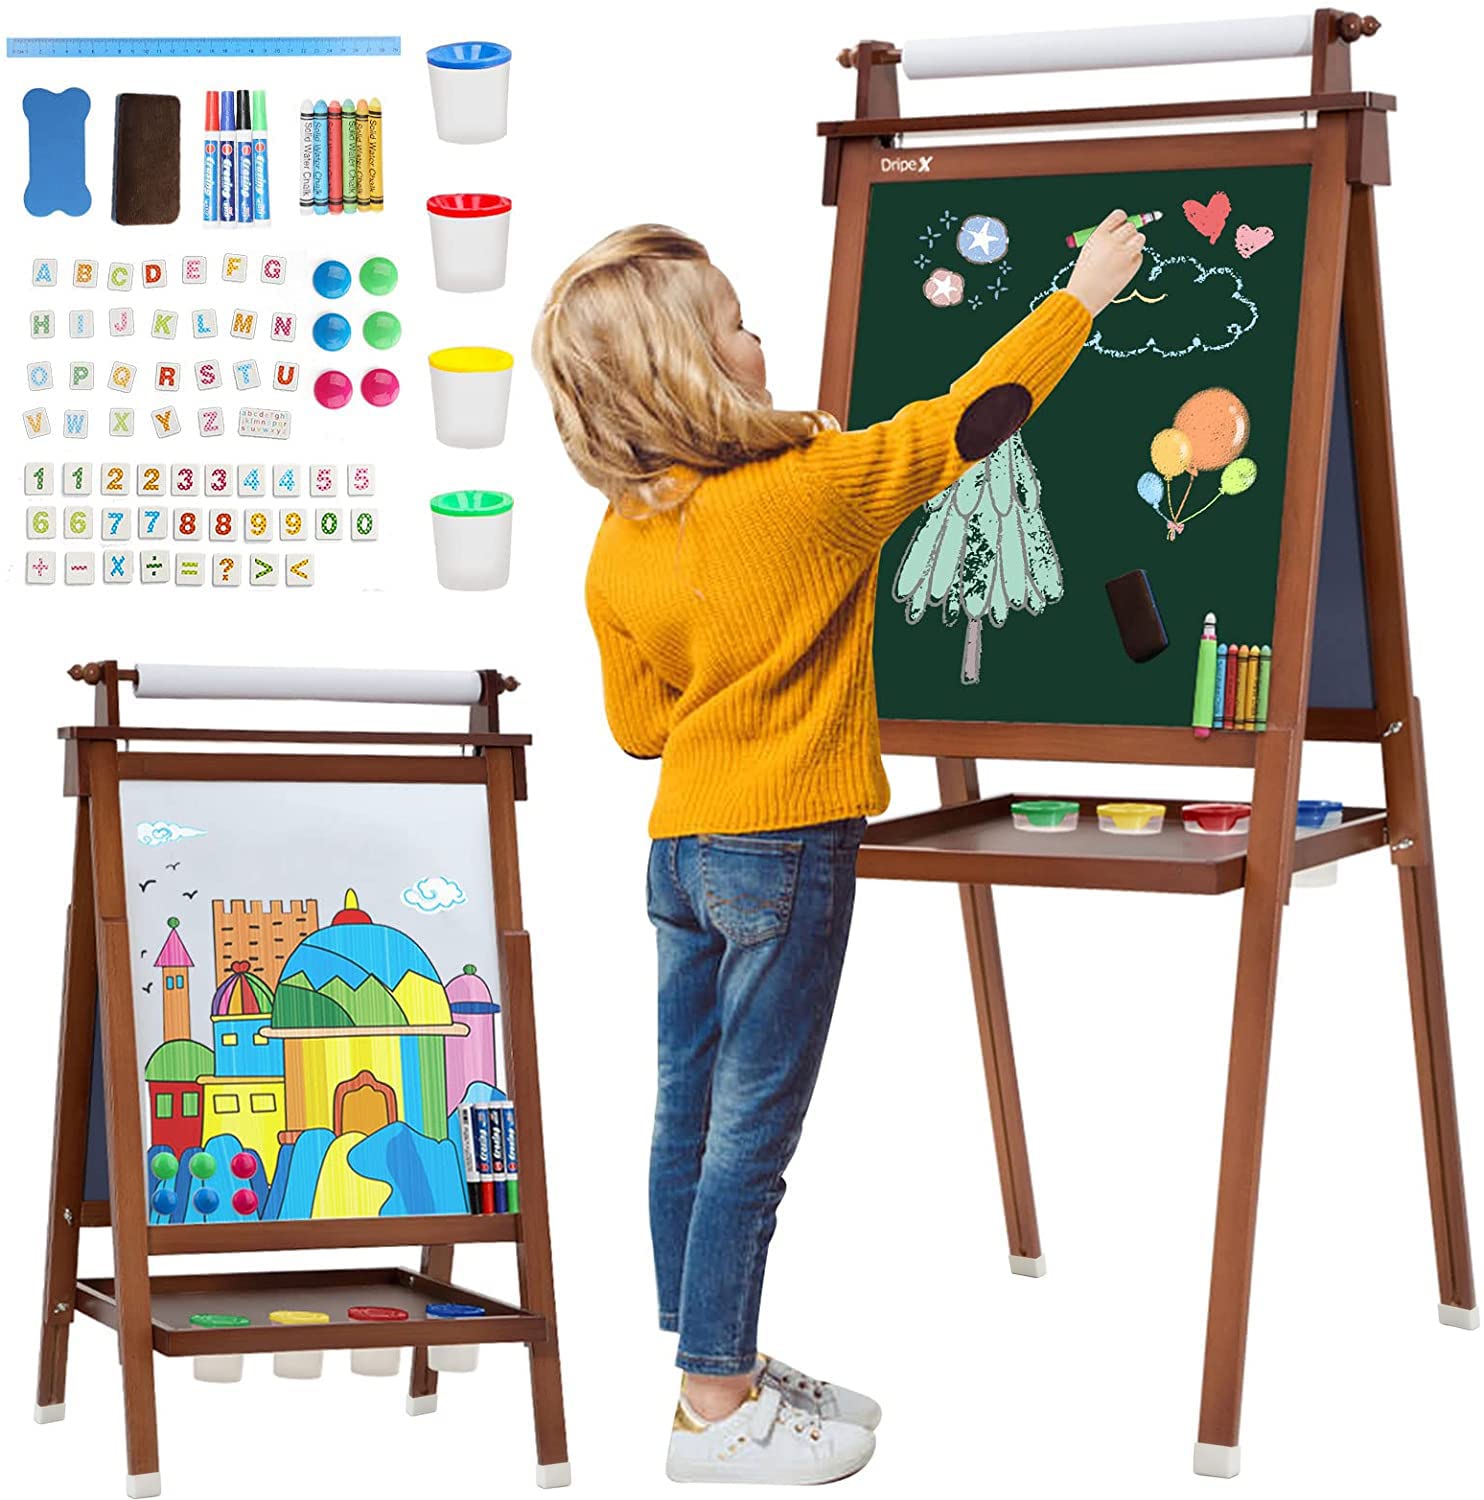 Dripex Kids Art Easel with Paper Roll Double Sided Toddler Easel Chalkboard and Magnetic Dry Erase Board for Kid Painting and Drawing, Multiple Kids Art Supplies Included Reddish Brown